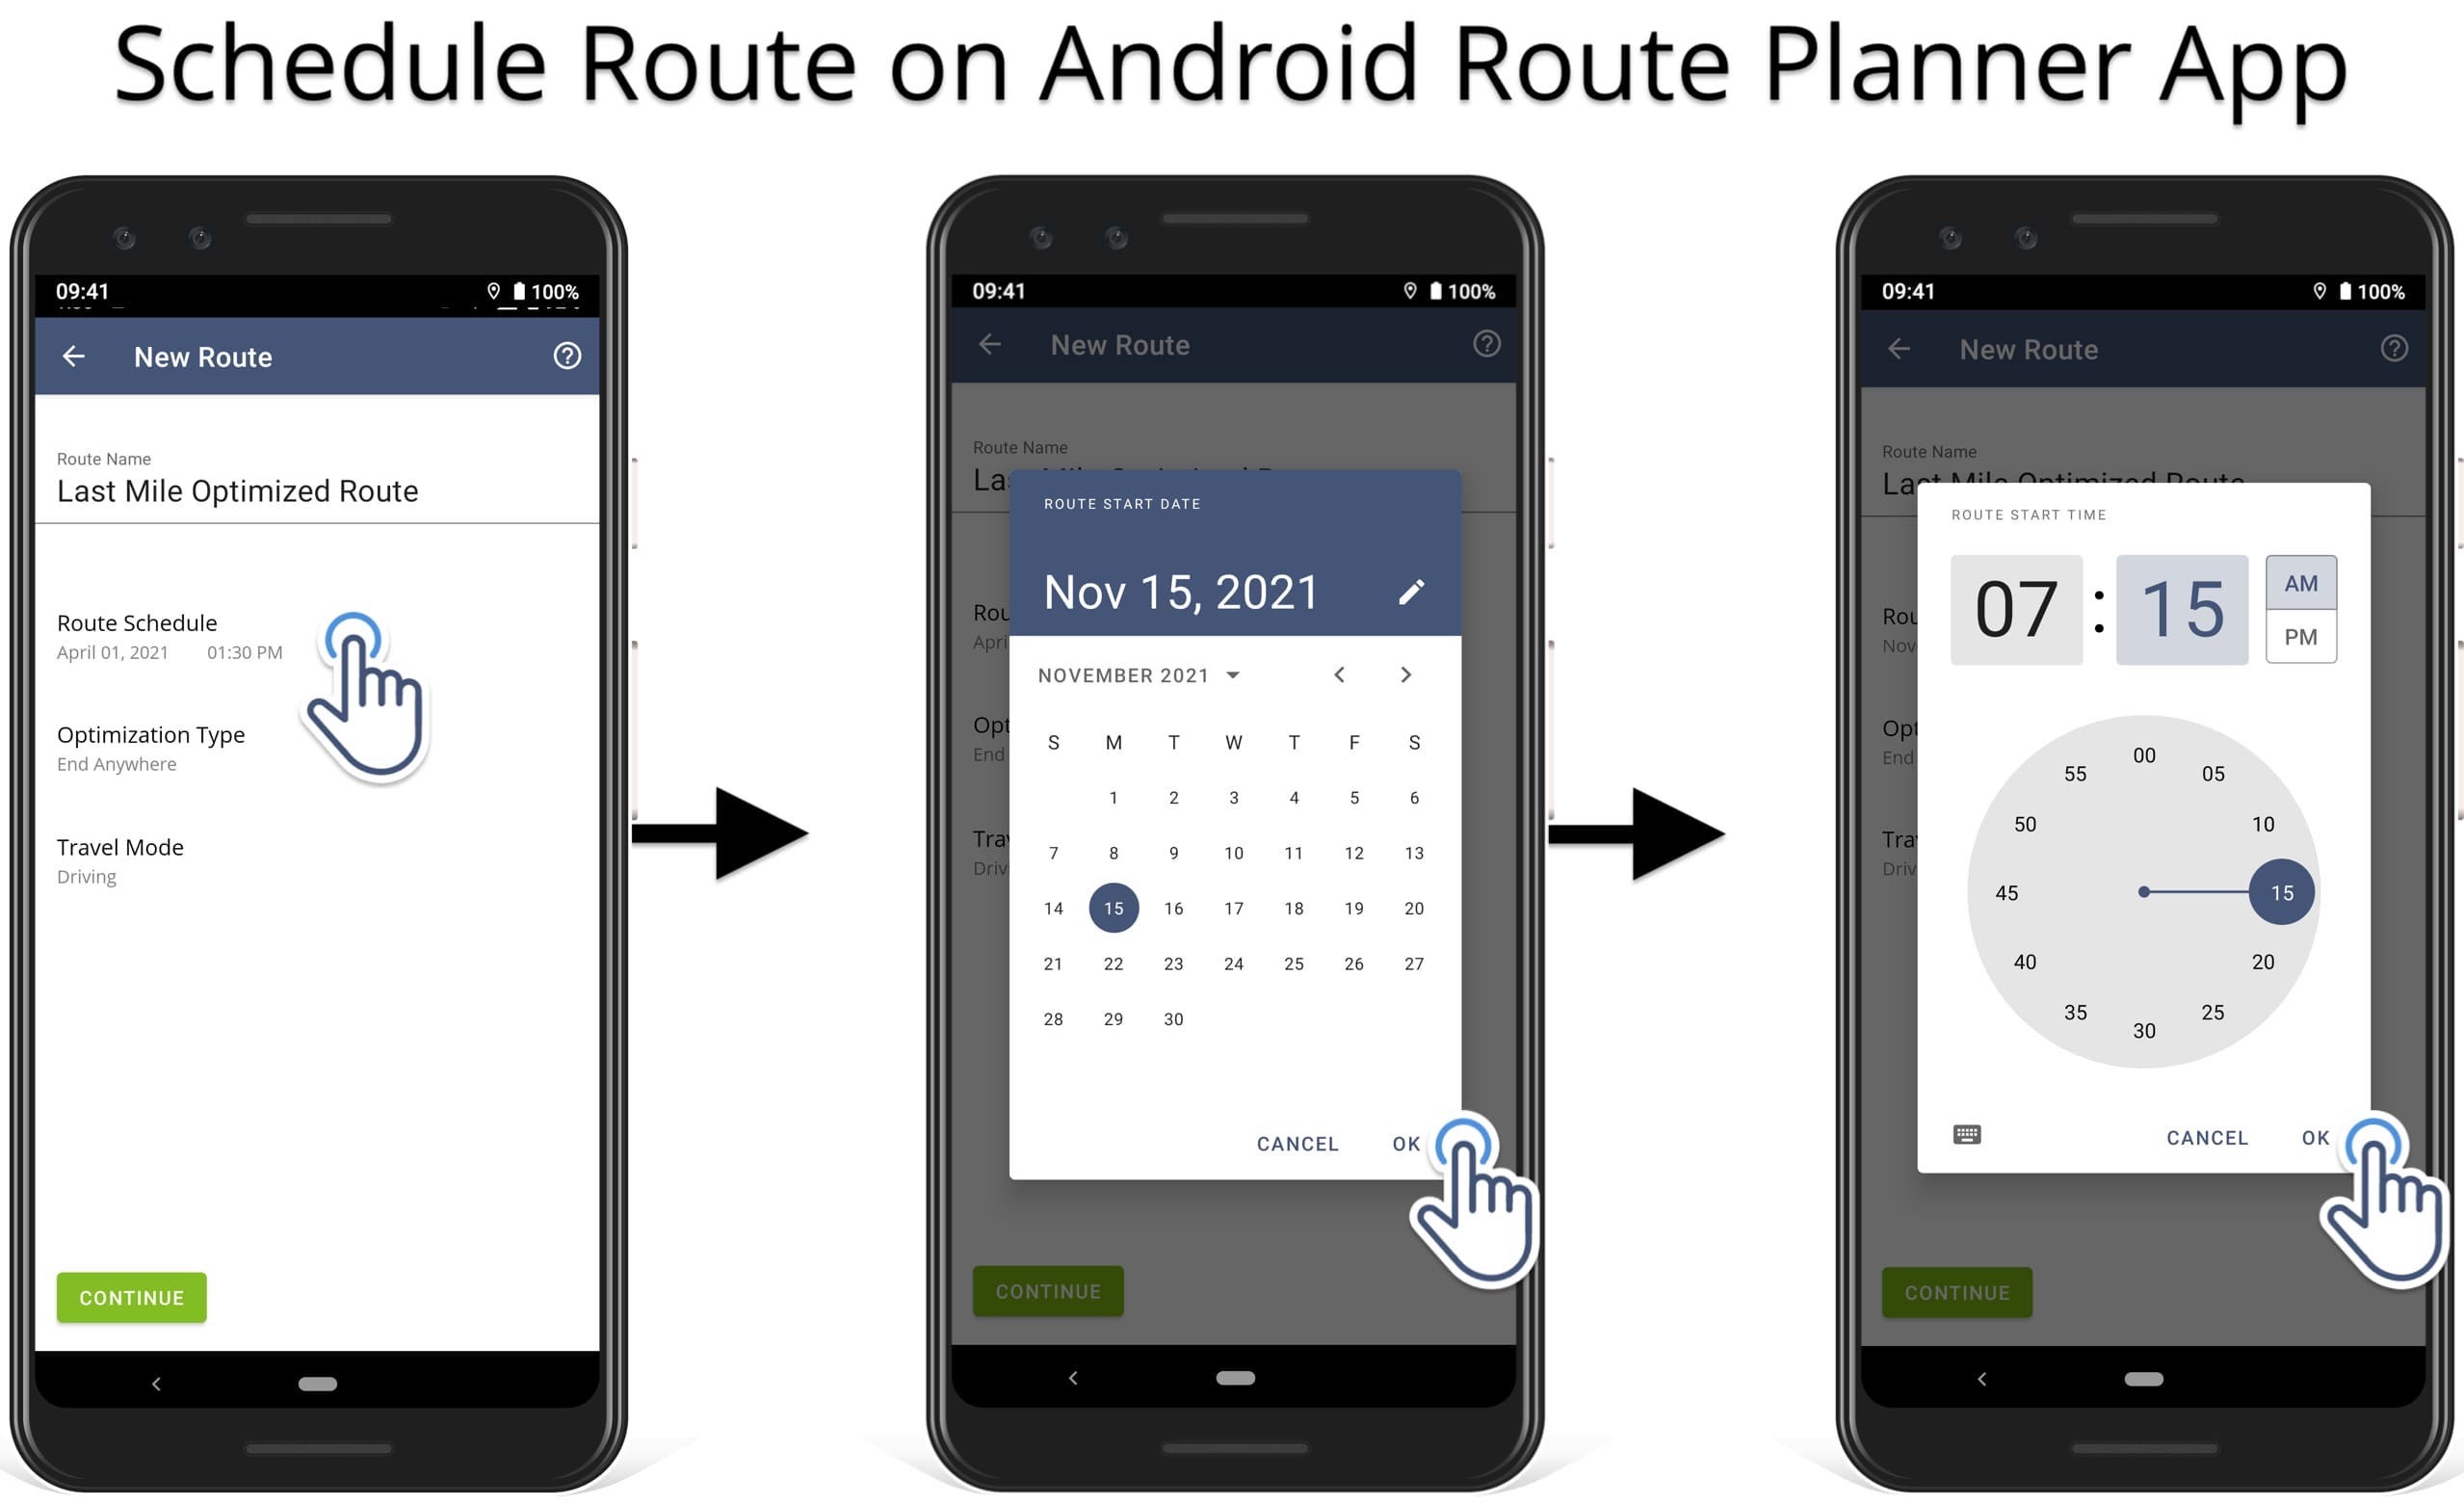 Changing the schedule route attributes using Route4Me's Android Route Planner app.